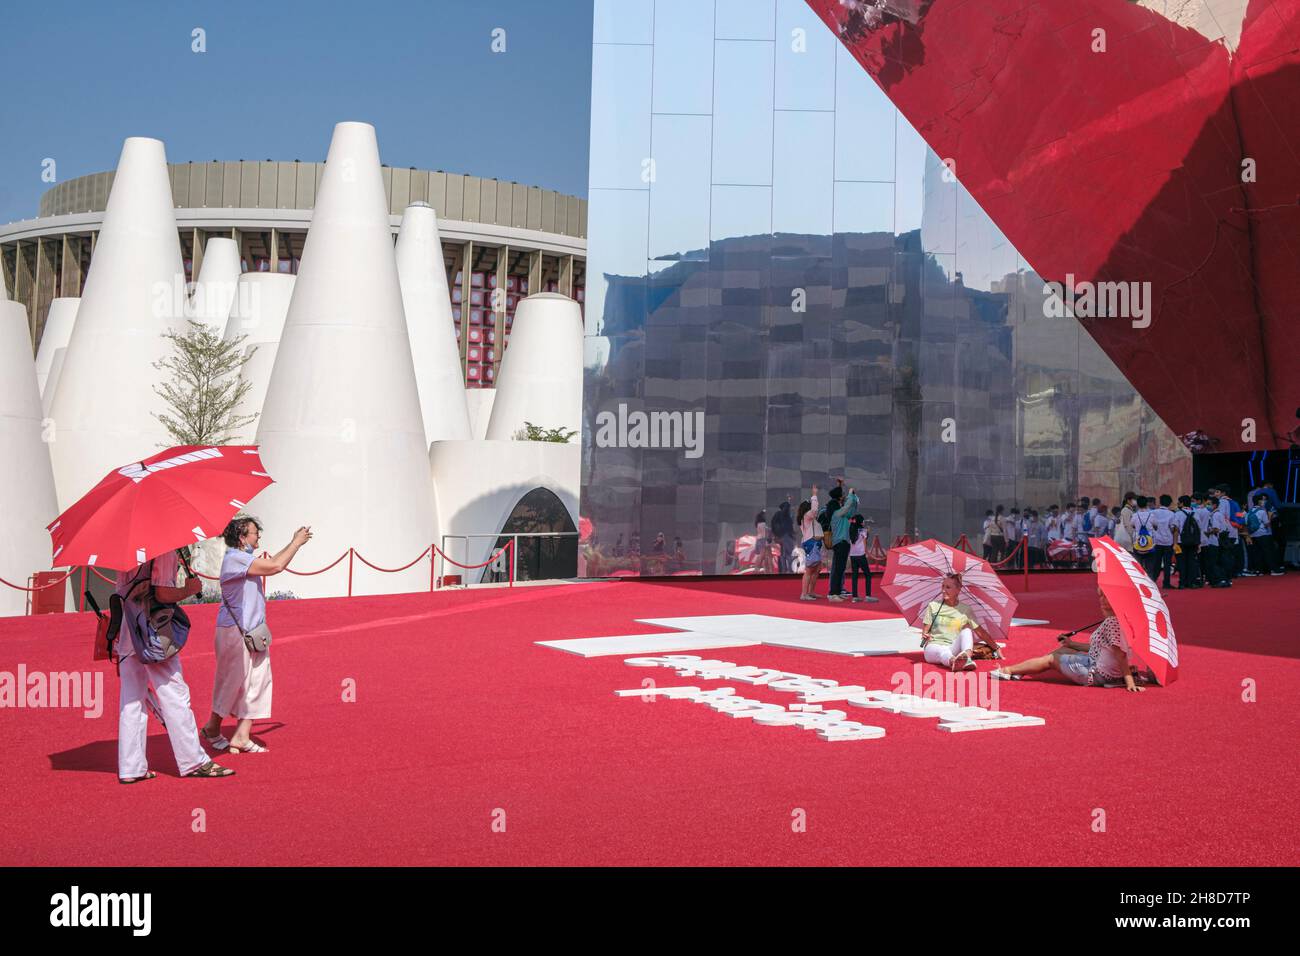 Visitors were given red umbrellas to pose with outside the Swiss Pavilion which was a giant mirror reflecting the red carpet, Expo 2020, Dubai, UAE Stock Photo